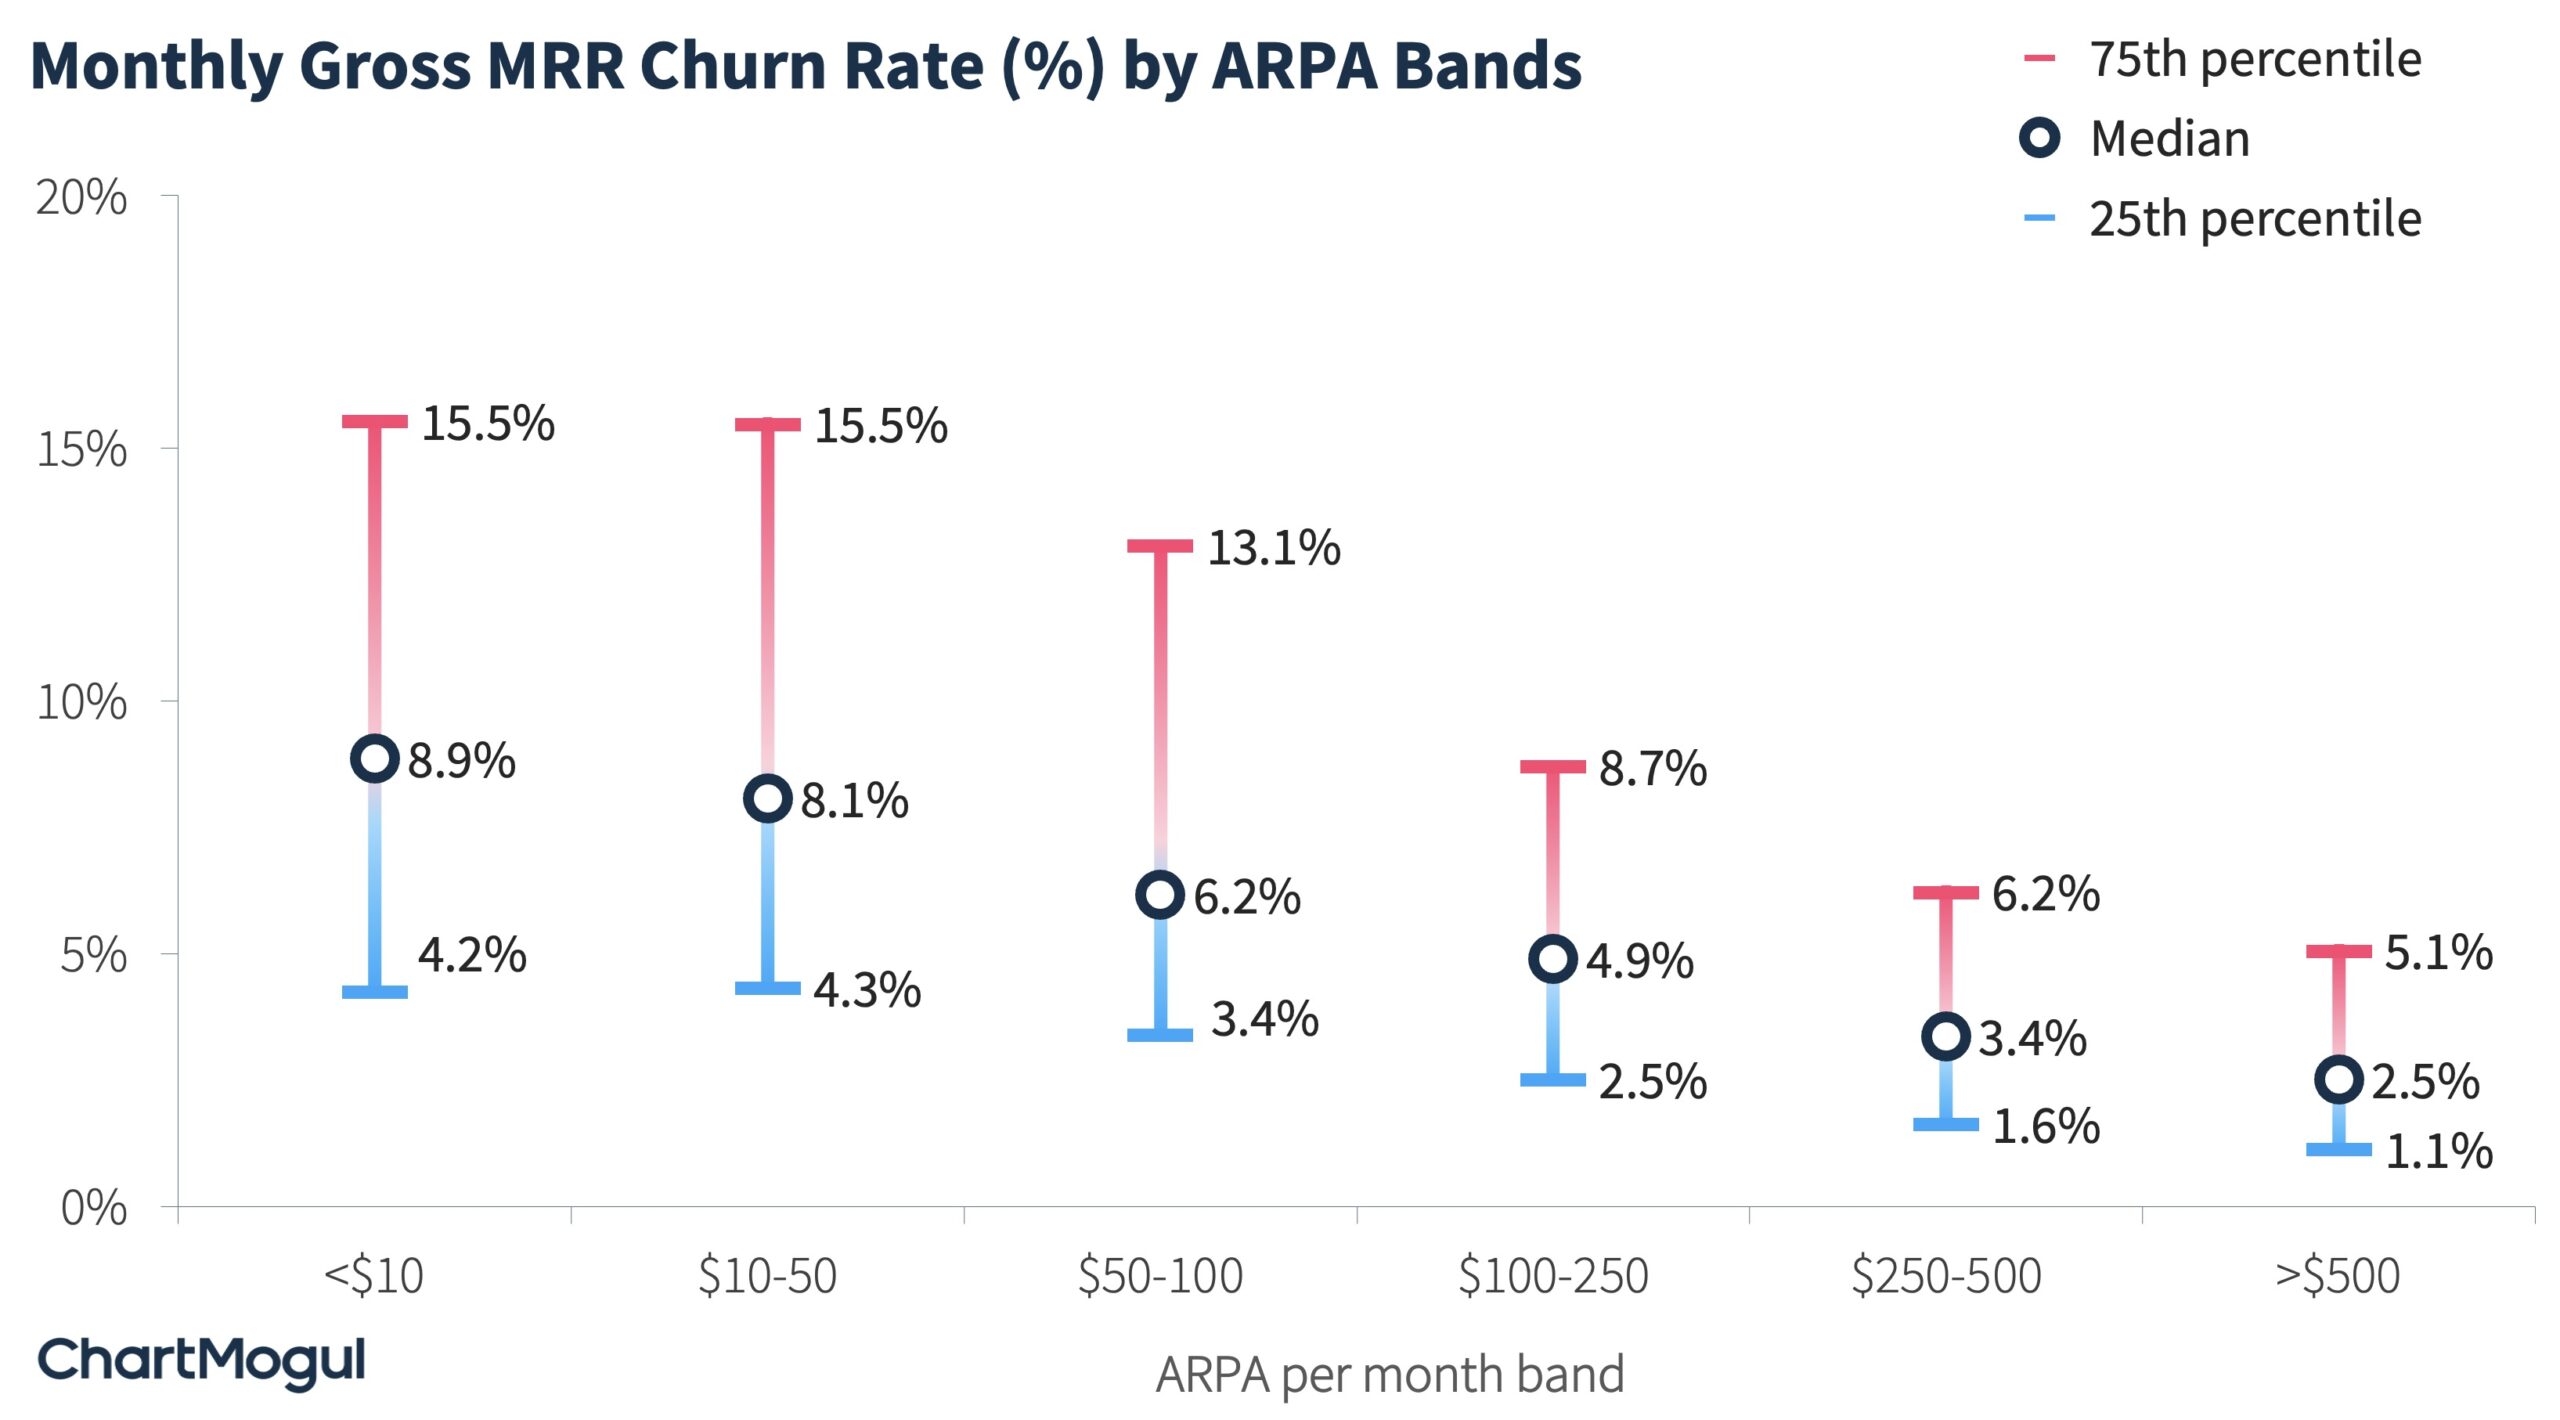 Monthly Gross MRR Churn Rate Percentiles By ARPA Band